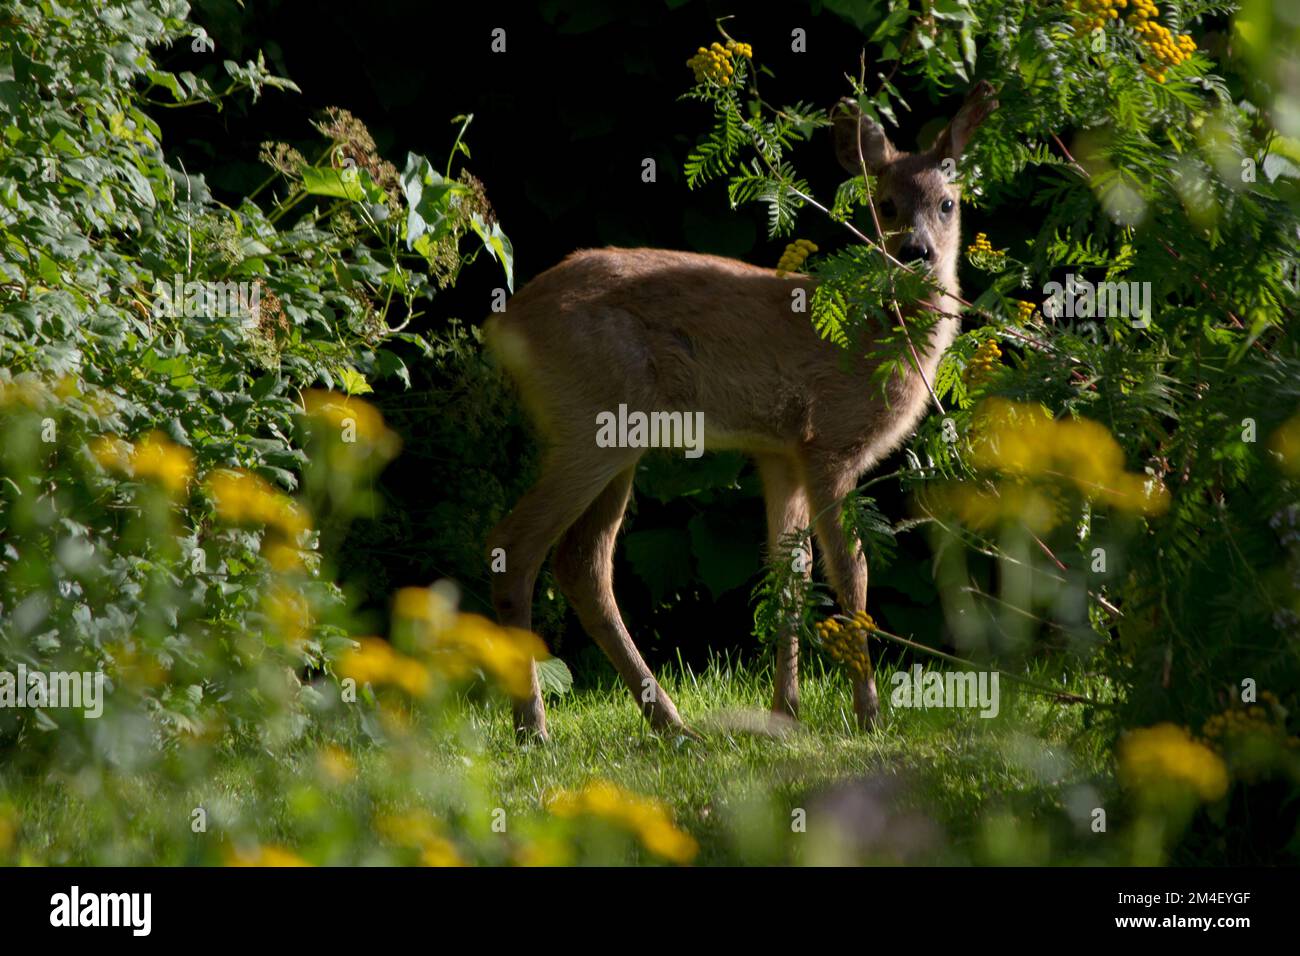 A beautiful view of fawn deer hiding in bushes Stock Photo